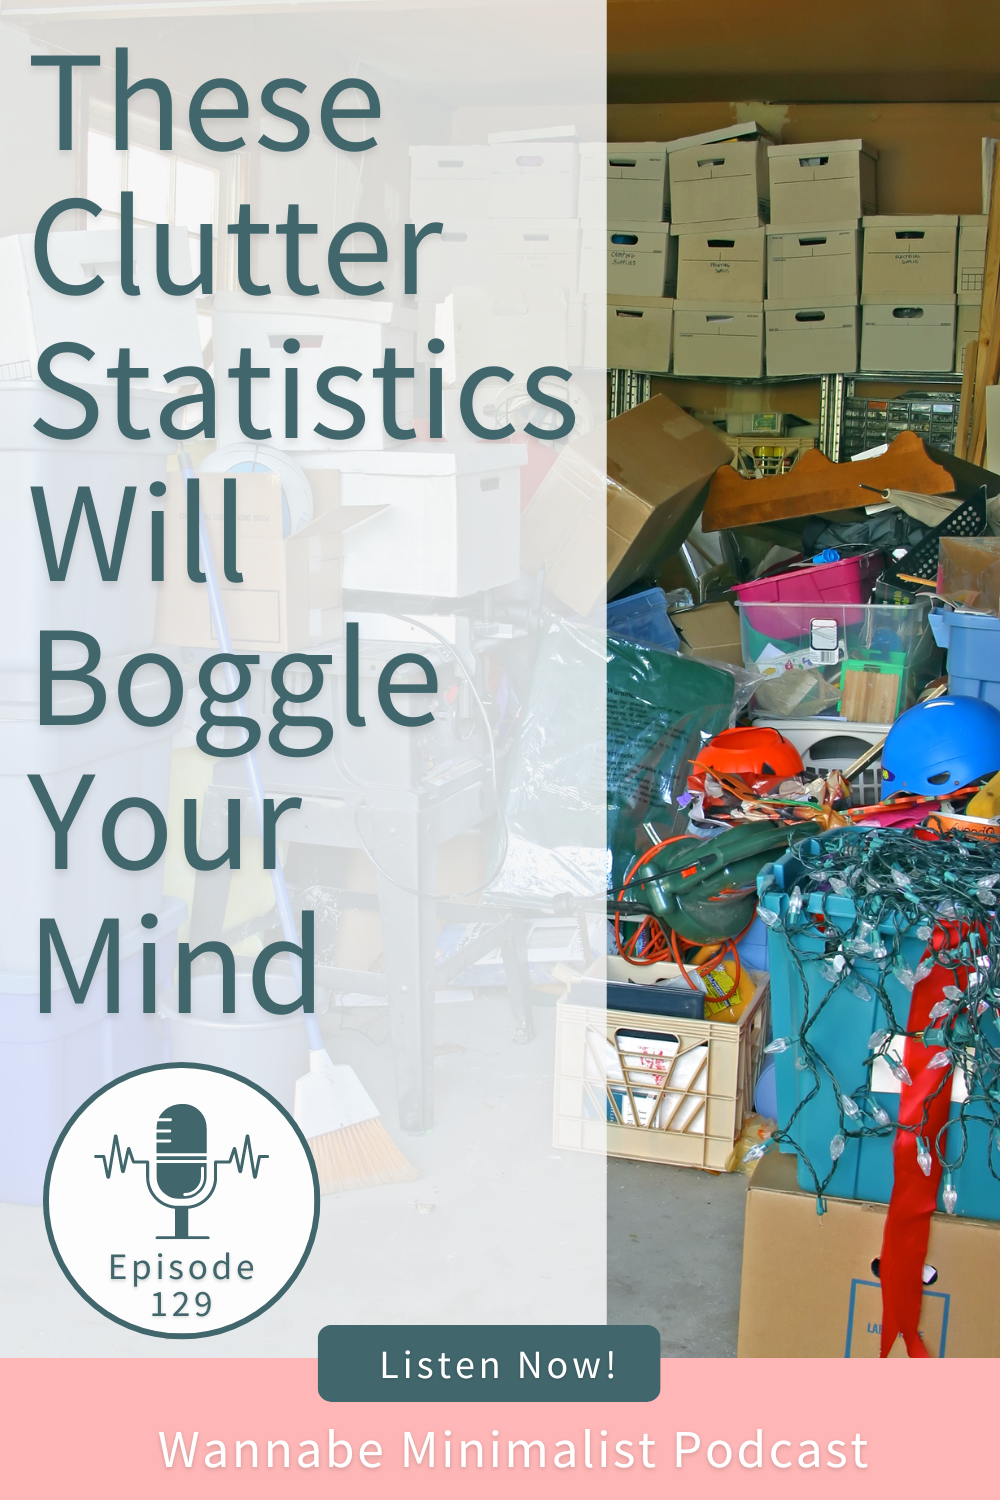 These Clutter Statistics Will Boggle Your Mind